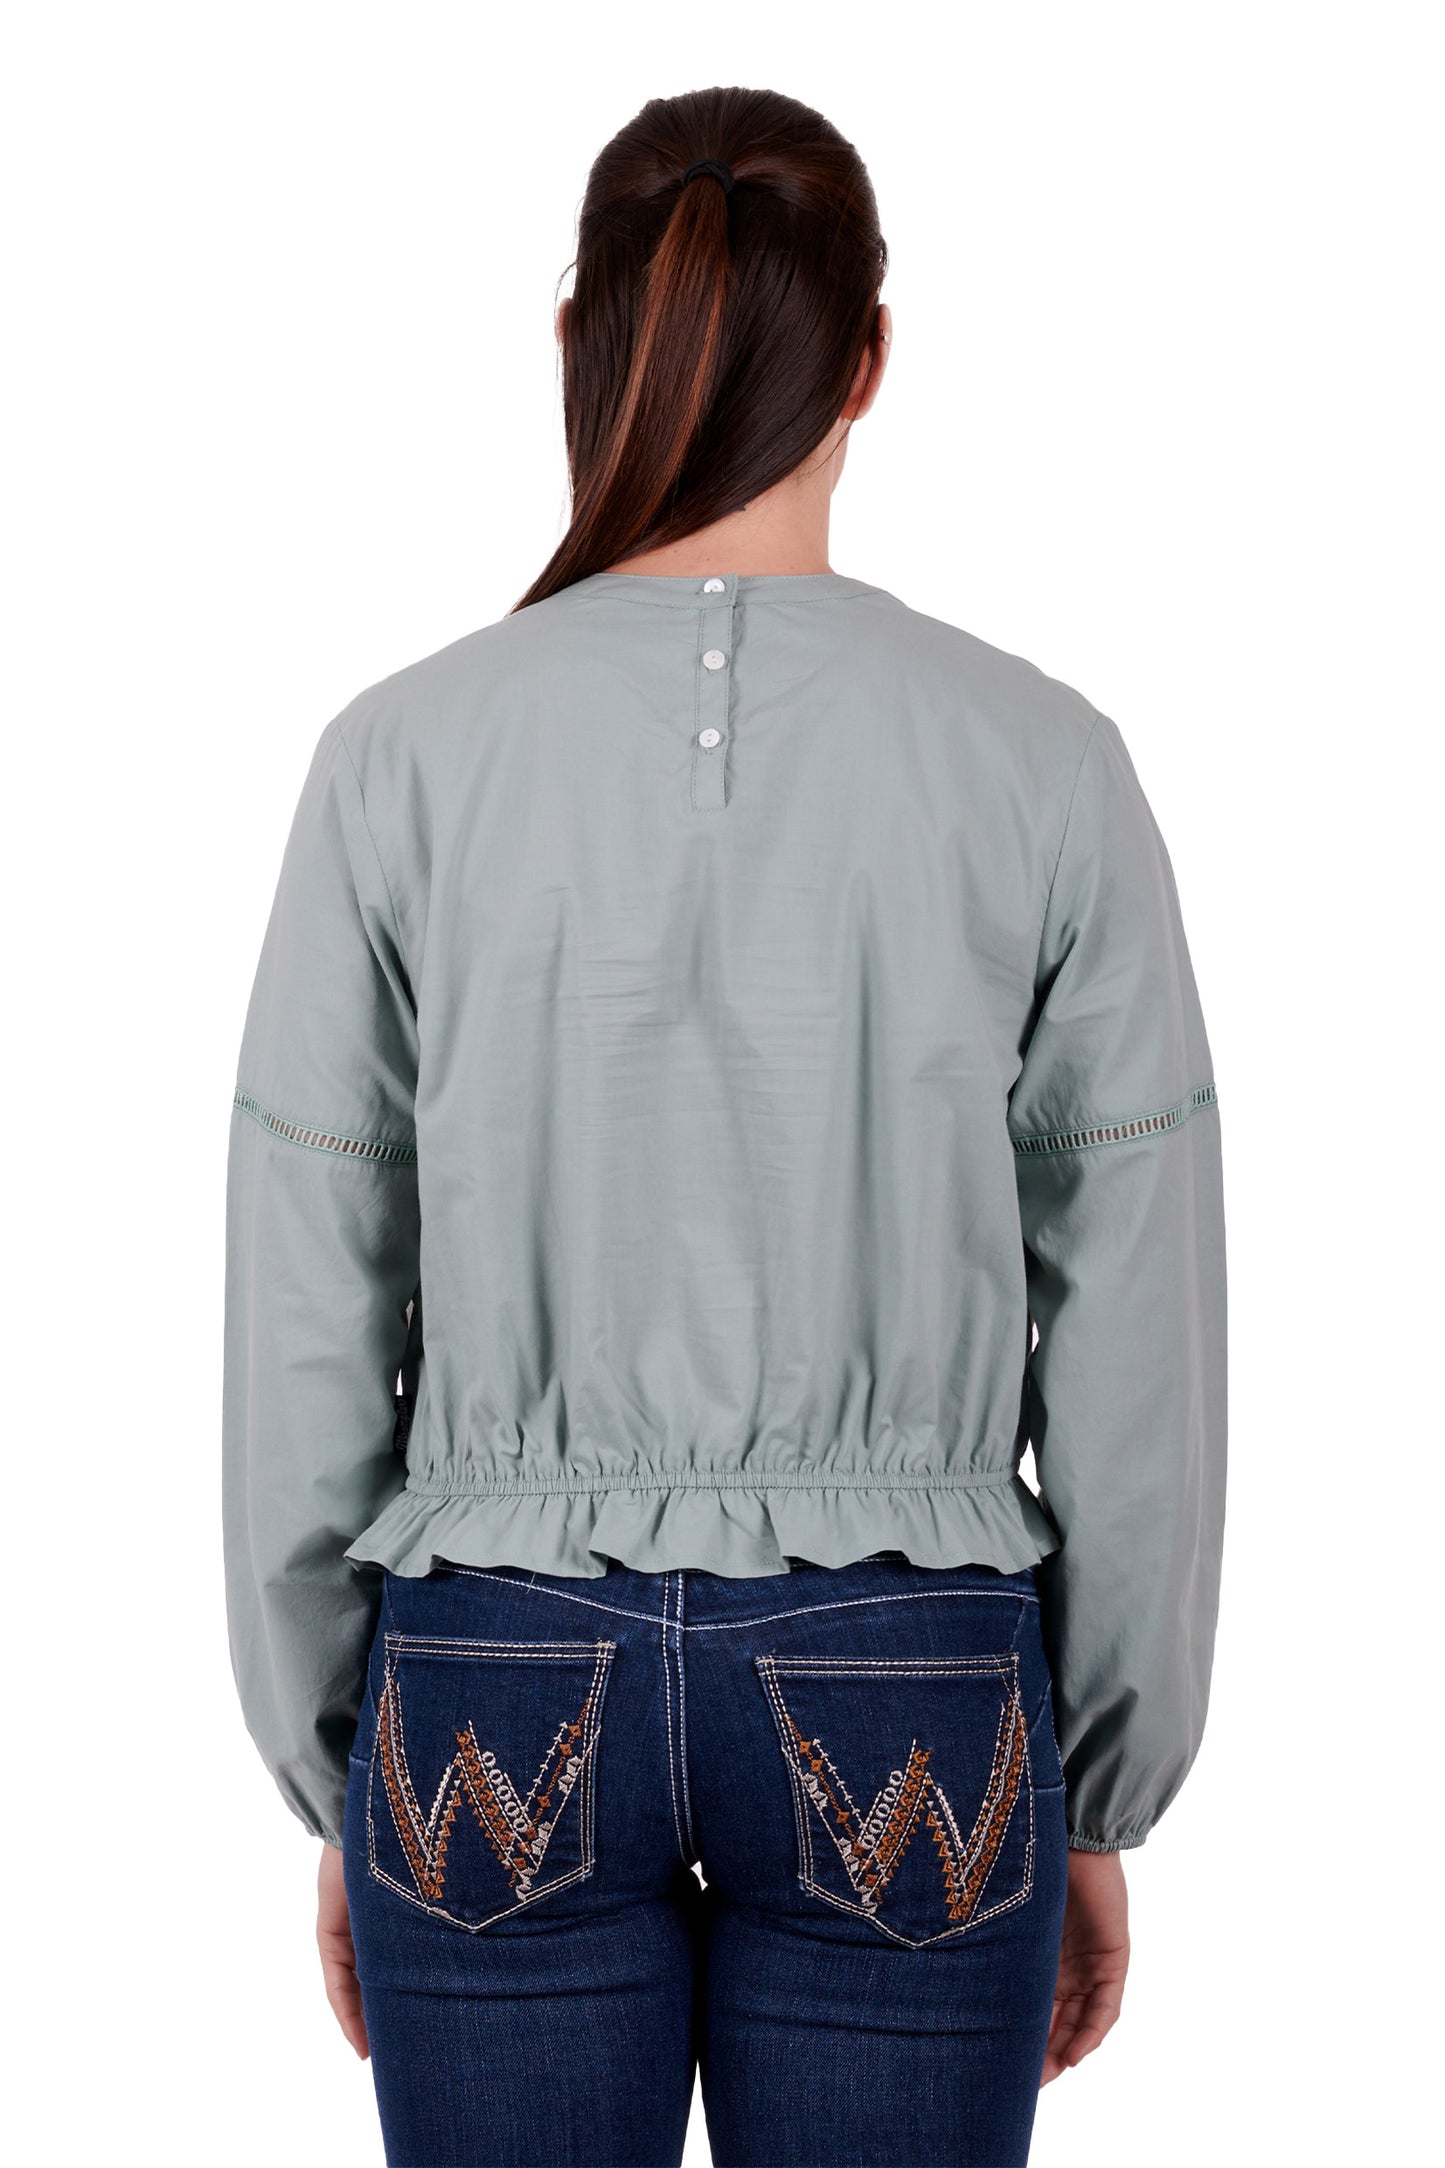 Wrangler Ladies Ryleigh L/S Blouse - Lily Pad - X3S2506594